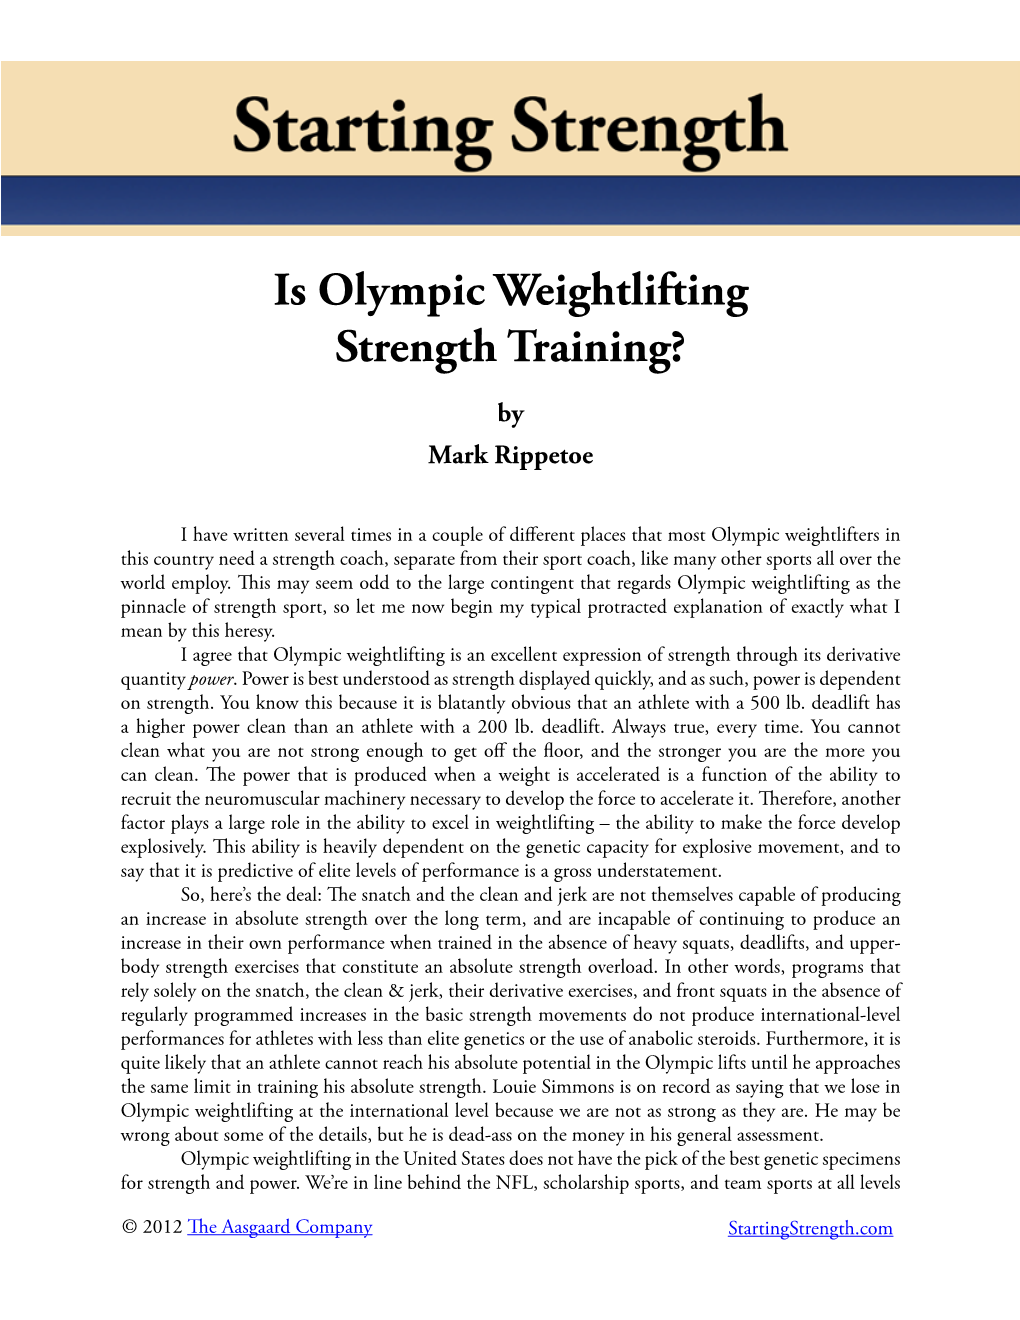 Is Olympic Weightlifting Strength Training?